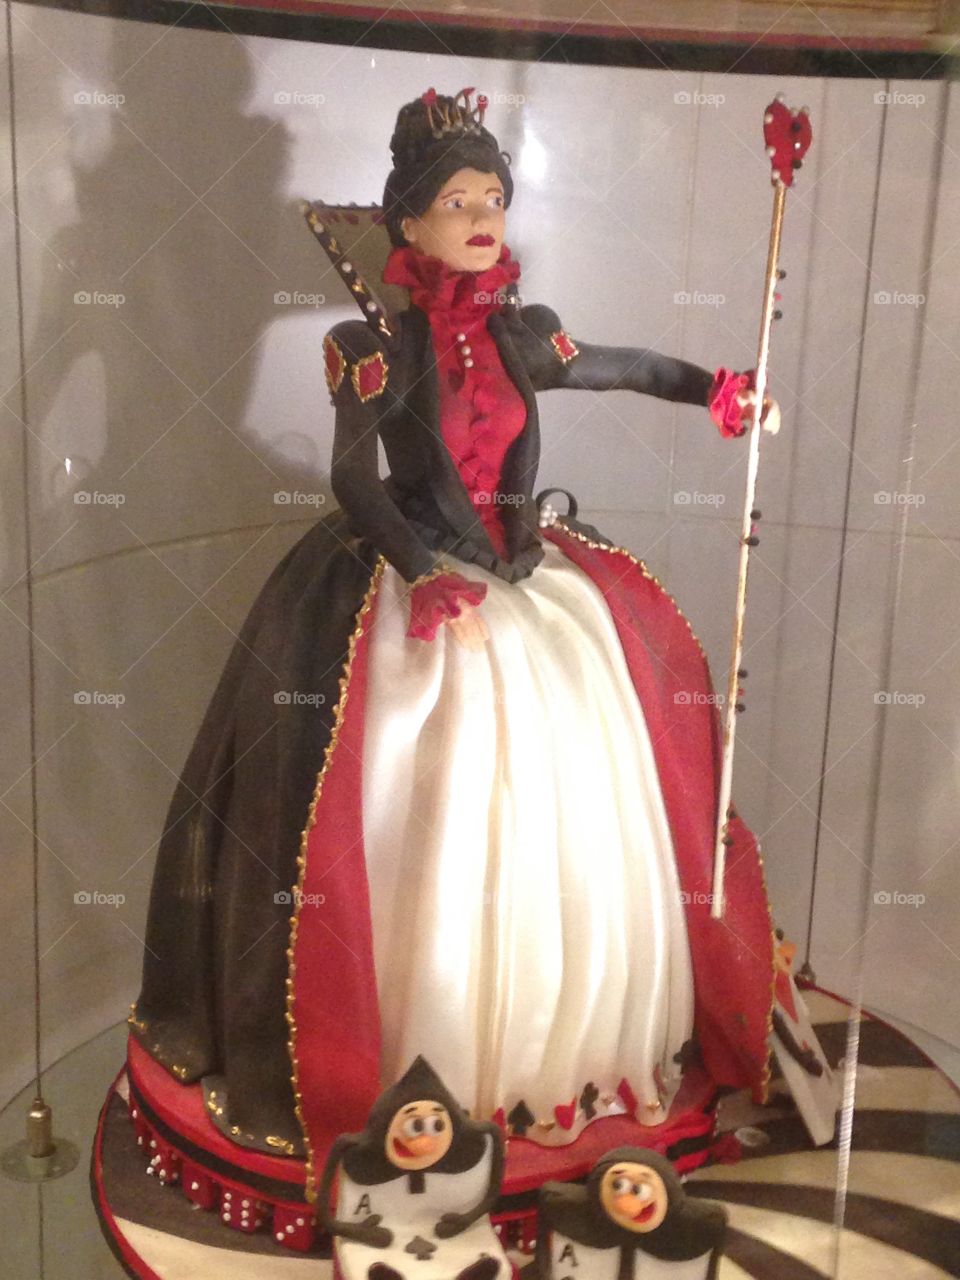 The Queen of hearts made out of cake